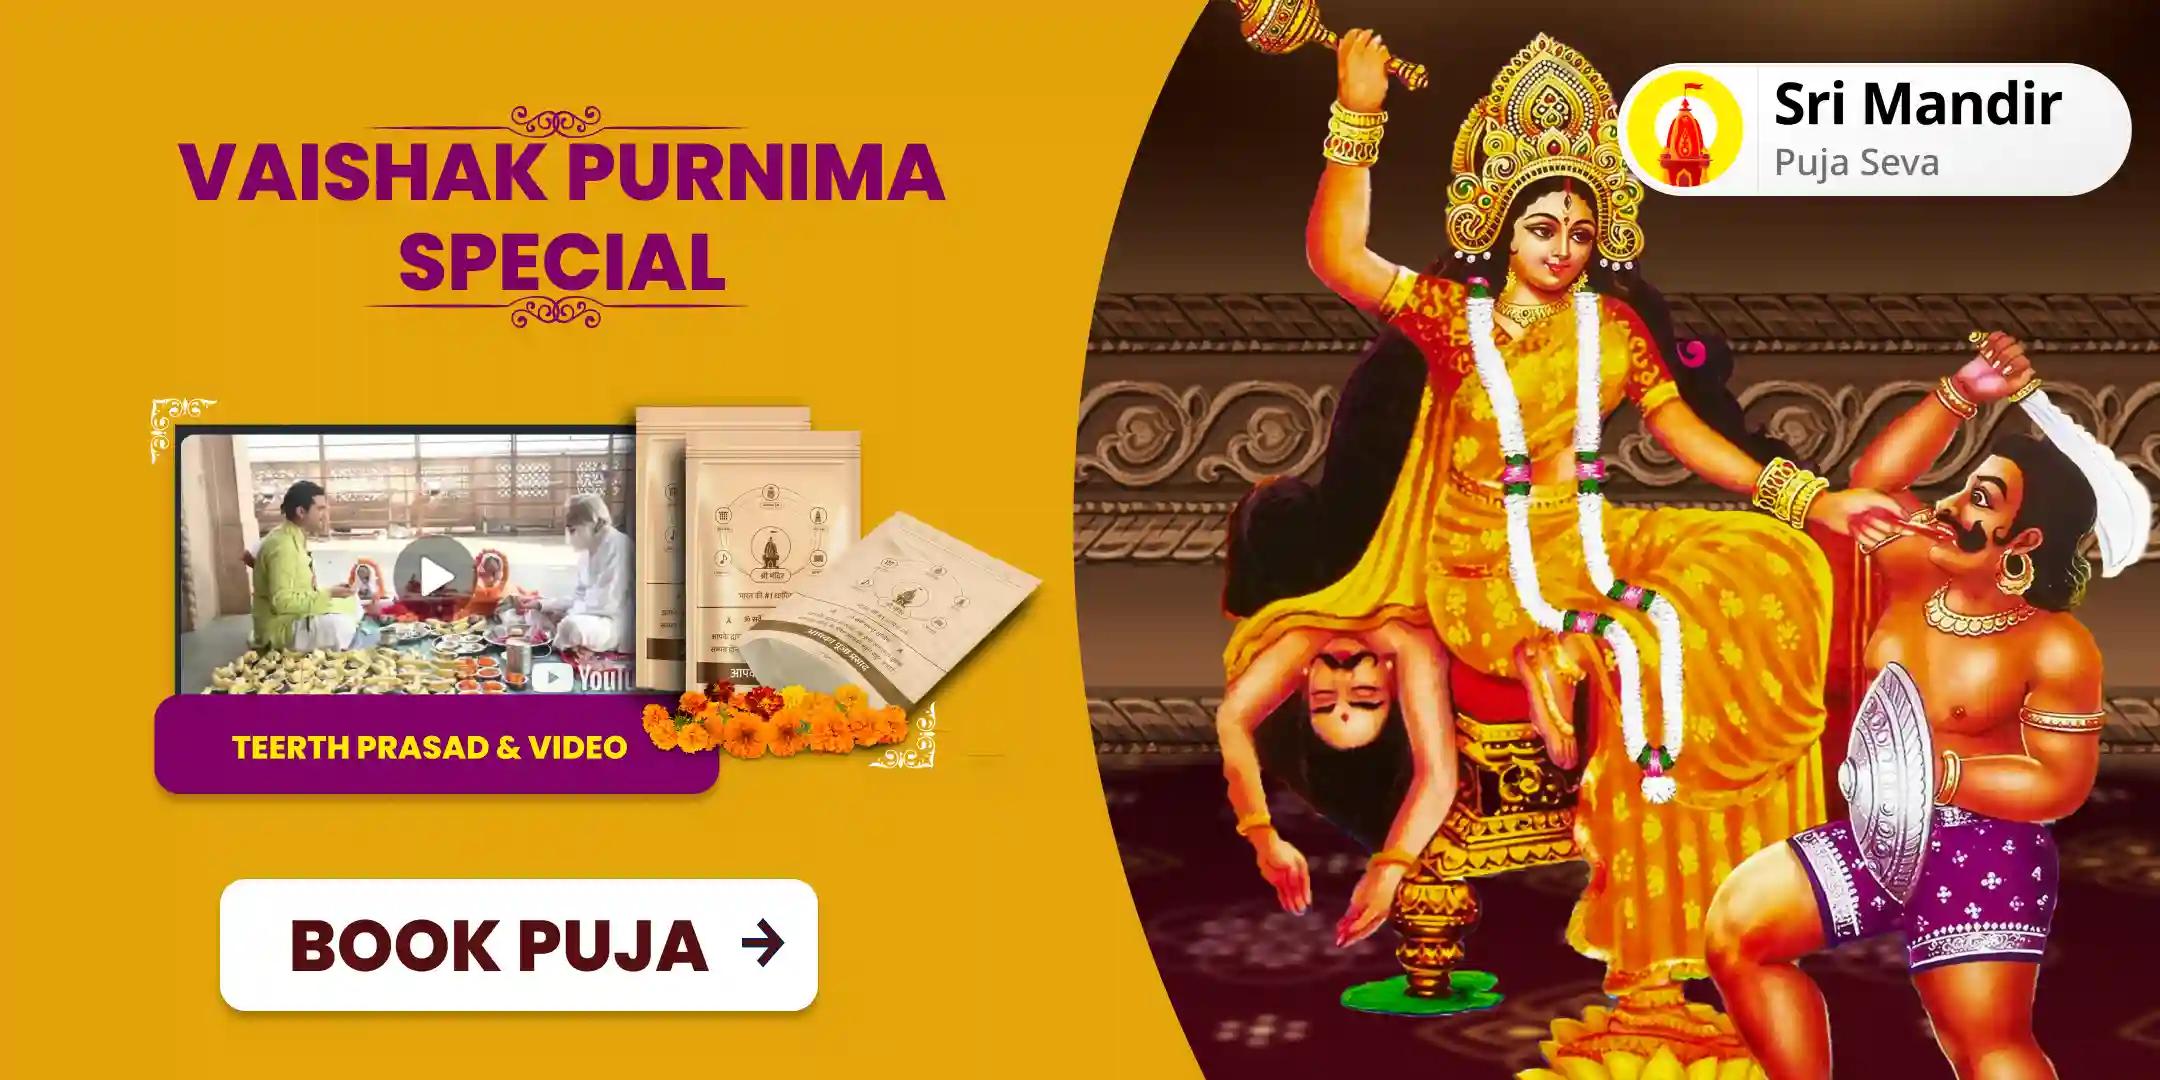 Vaishakh Purnima Special Maa Bagalamukhi Tantra Yukta Yagya for Victory in Court Cases and Victory over Enemies